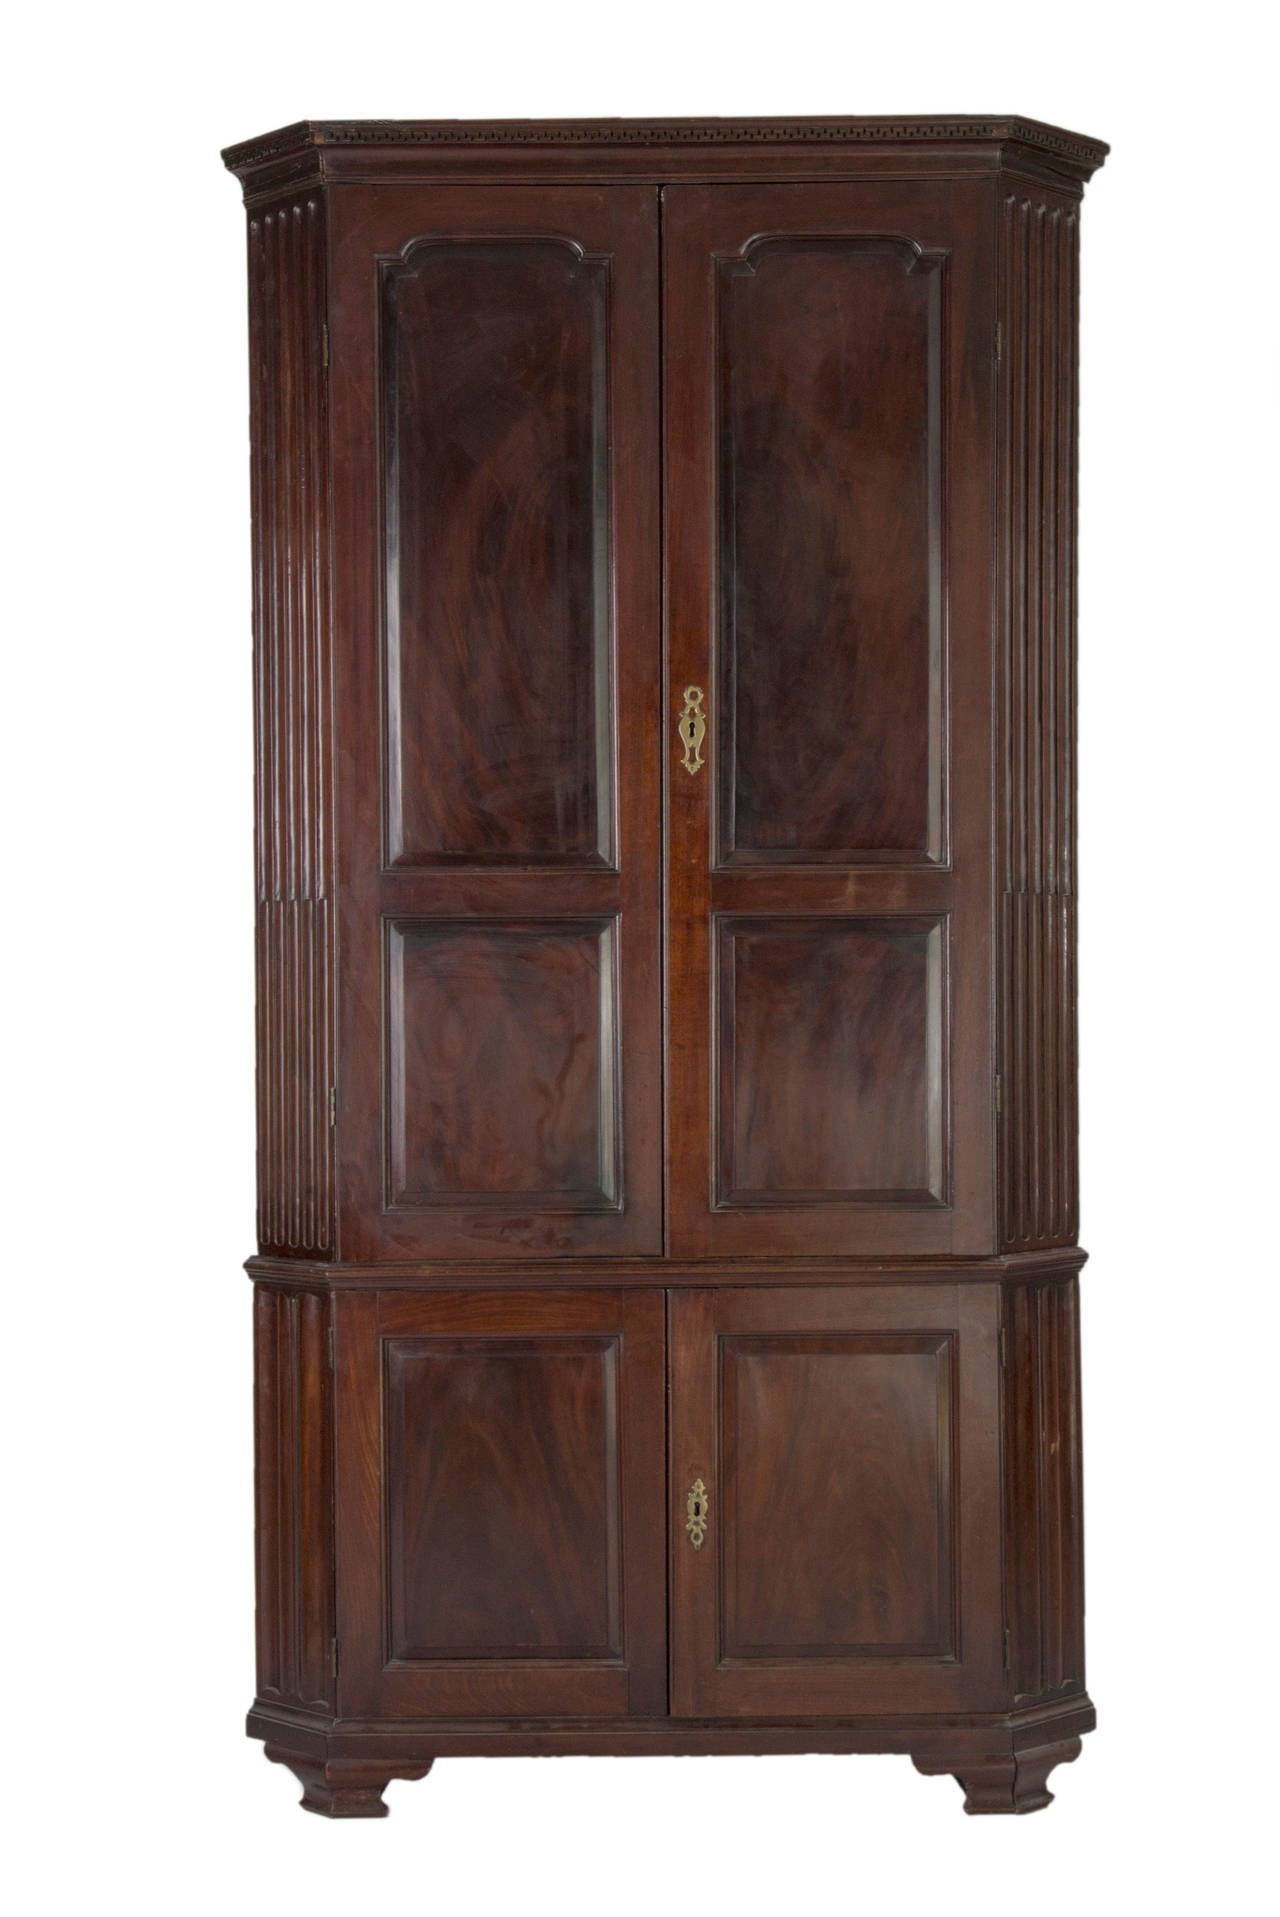 A very nice George III Chippendale period mahogany and pine two-piece corner cupboard with a superb barrel-shaped interior with the original and decorative floral painting. Good original color and patina, architectural detail in the cornice with